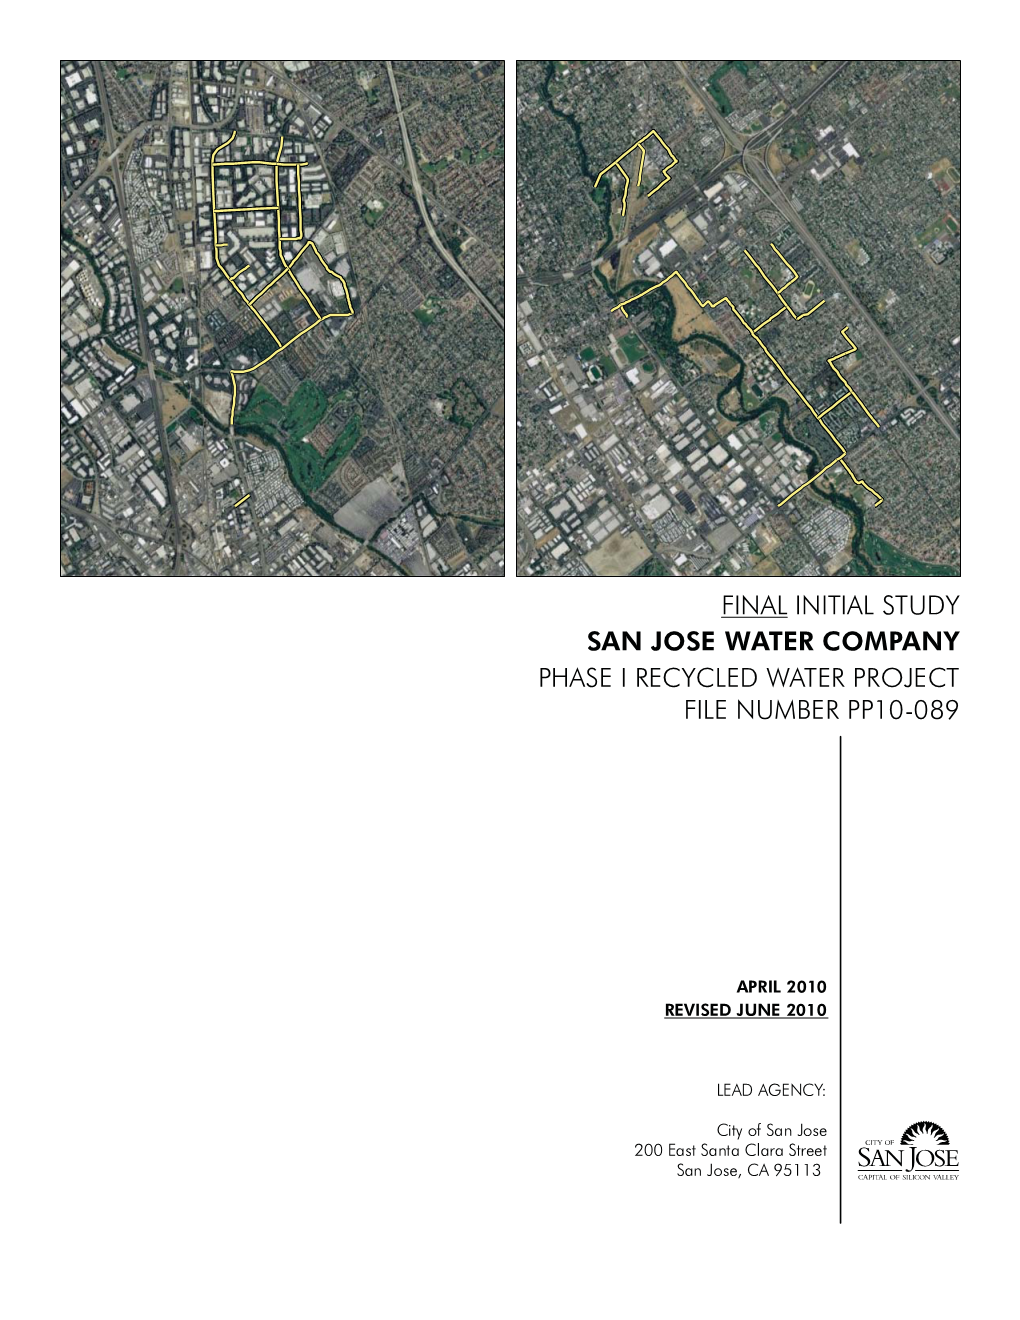 Final Initial Study San Jose Water Company Phase I Recycled Water Project File Number Pp10-089